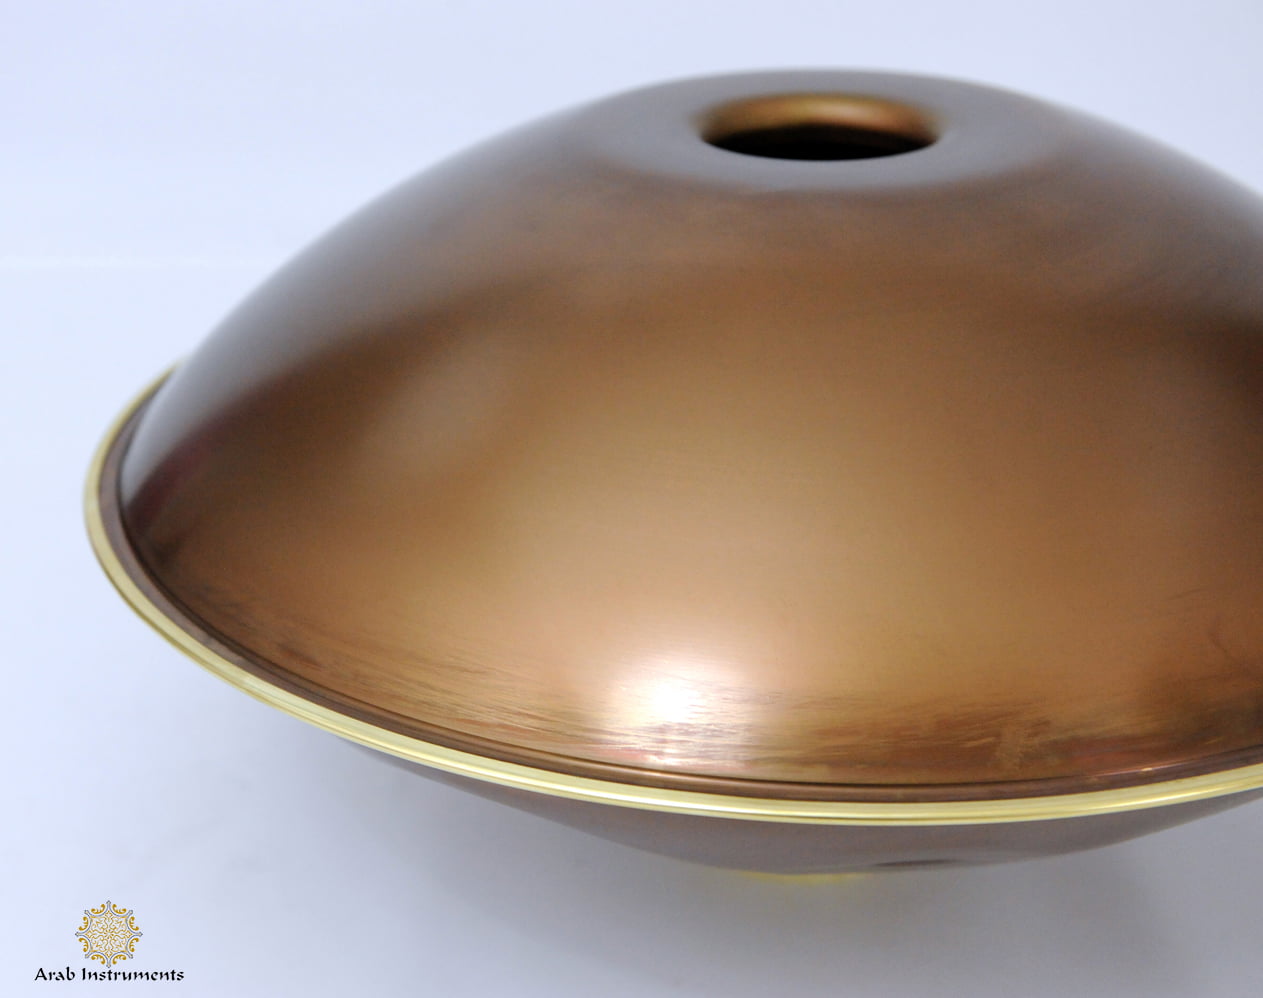 Professional 9 Notes Handpan The Opera